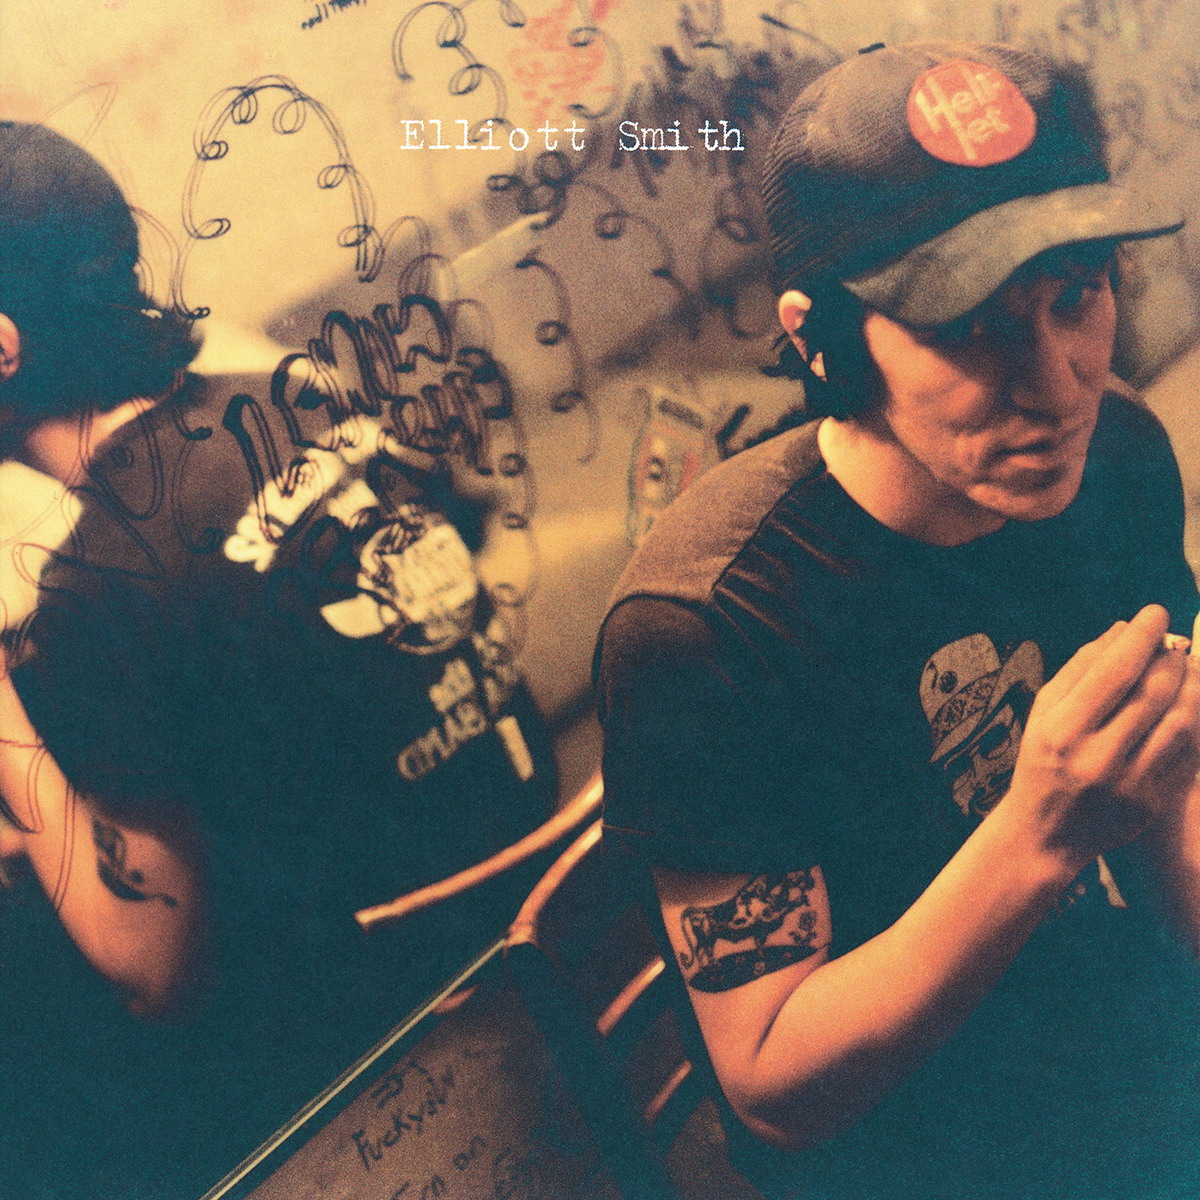 Elliott Smith – Either/Or (Expanded Edition) (1997/2017) [Bandcamp FLAC 24bit/44,1kHz]